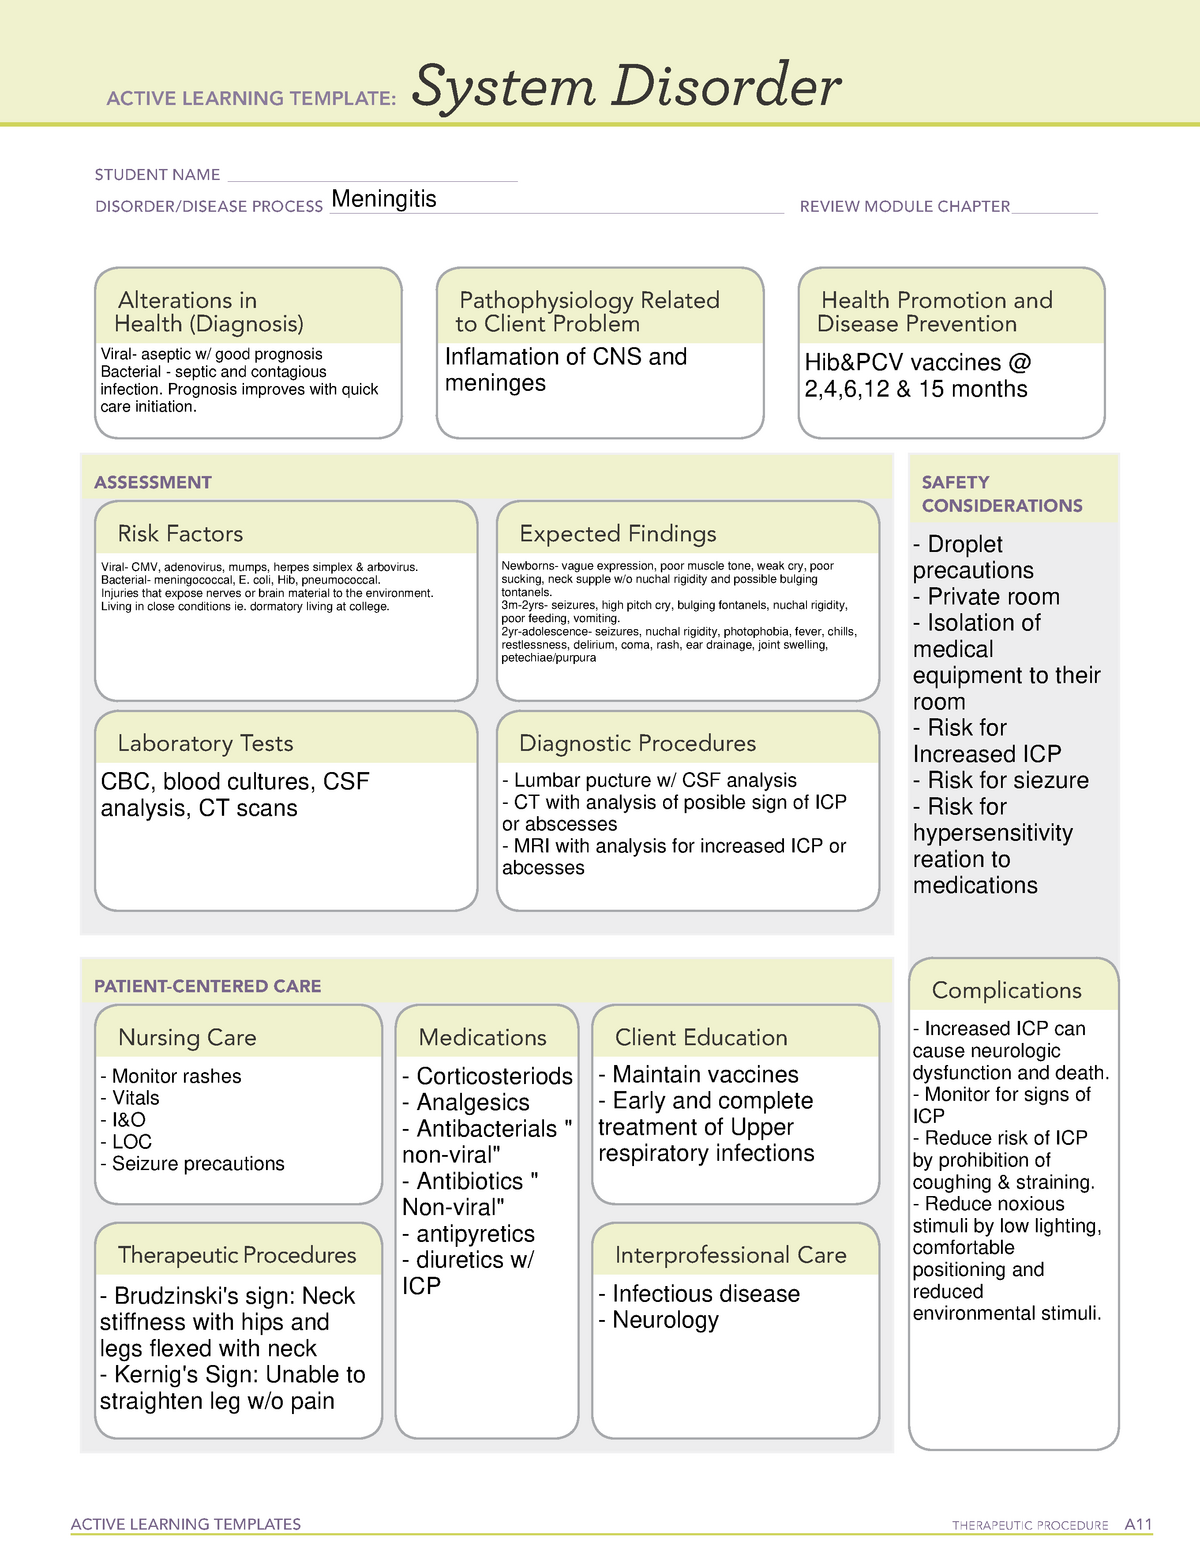 Meningitis System Disorder Template ACTIVE LEARNING TEMPLATES